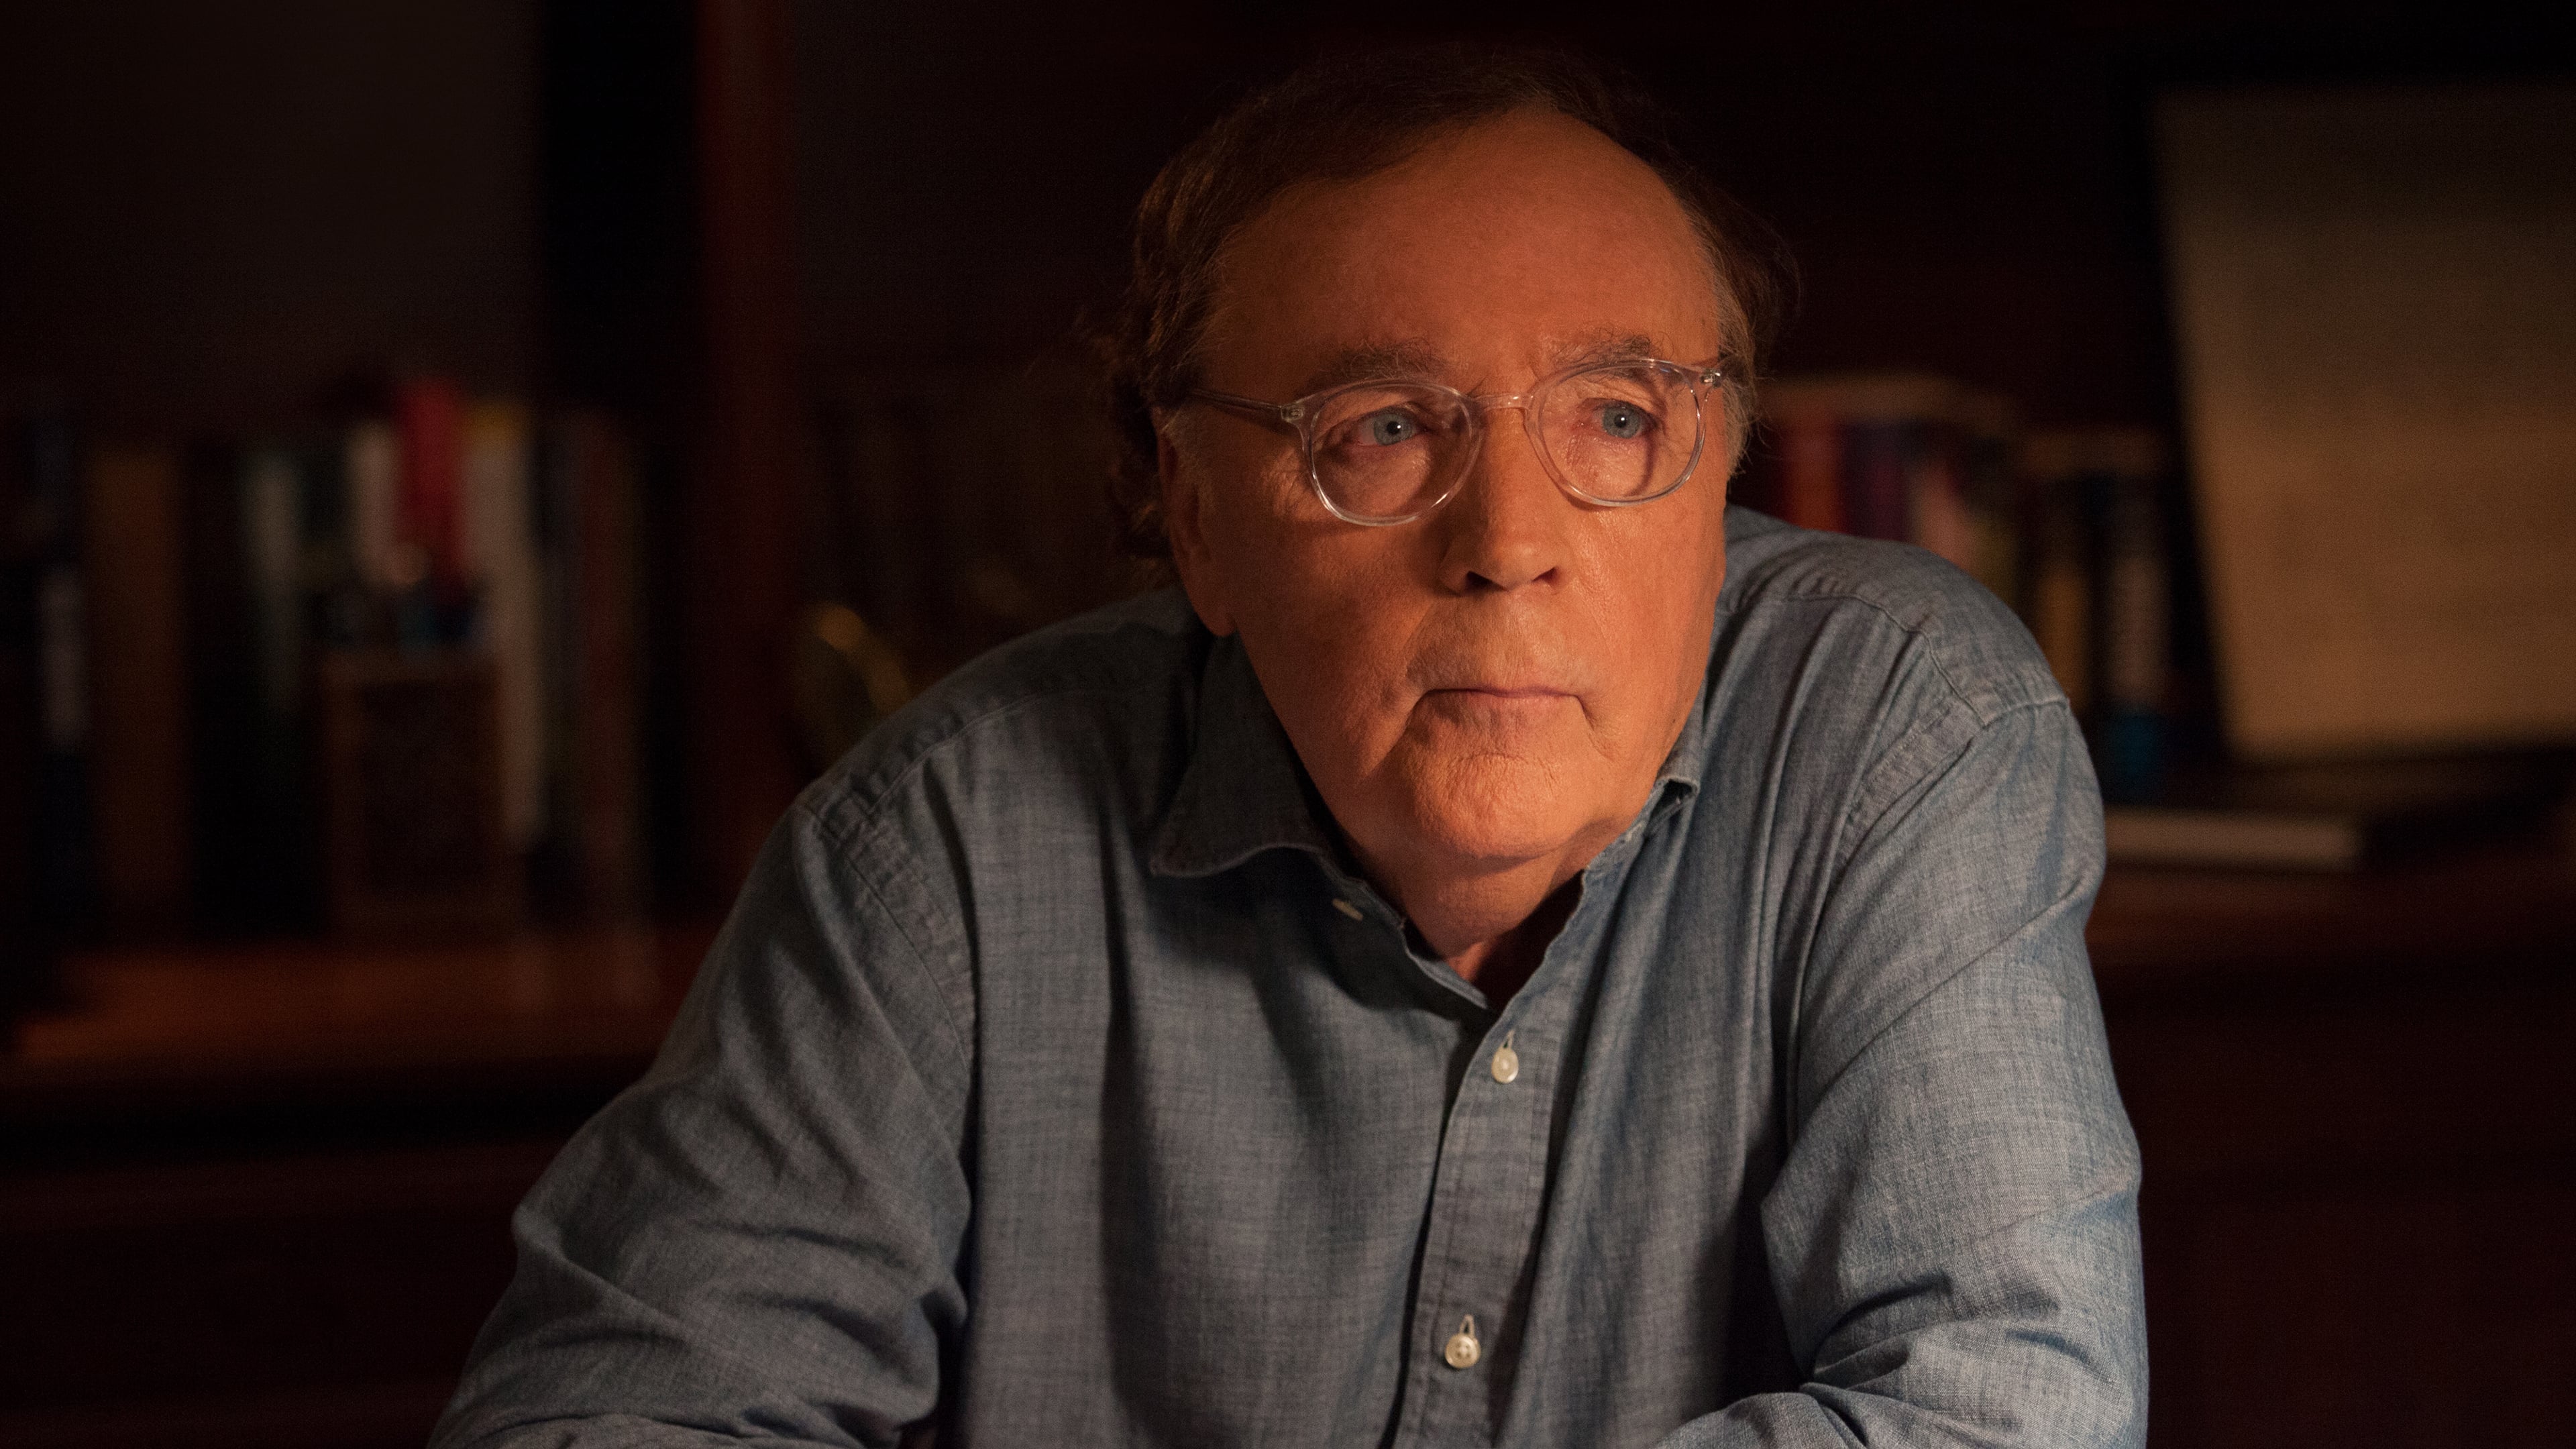 James Patterson's Murder Is Forever